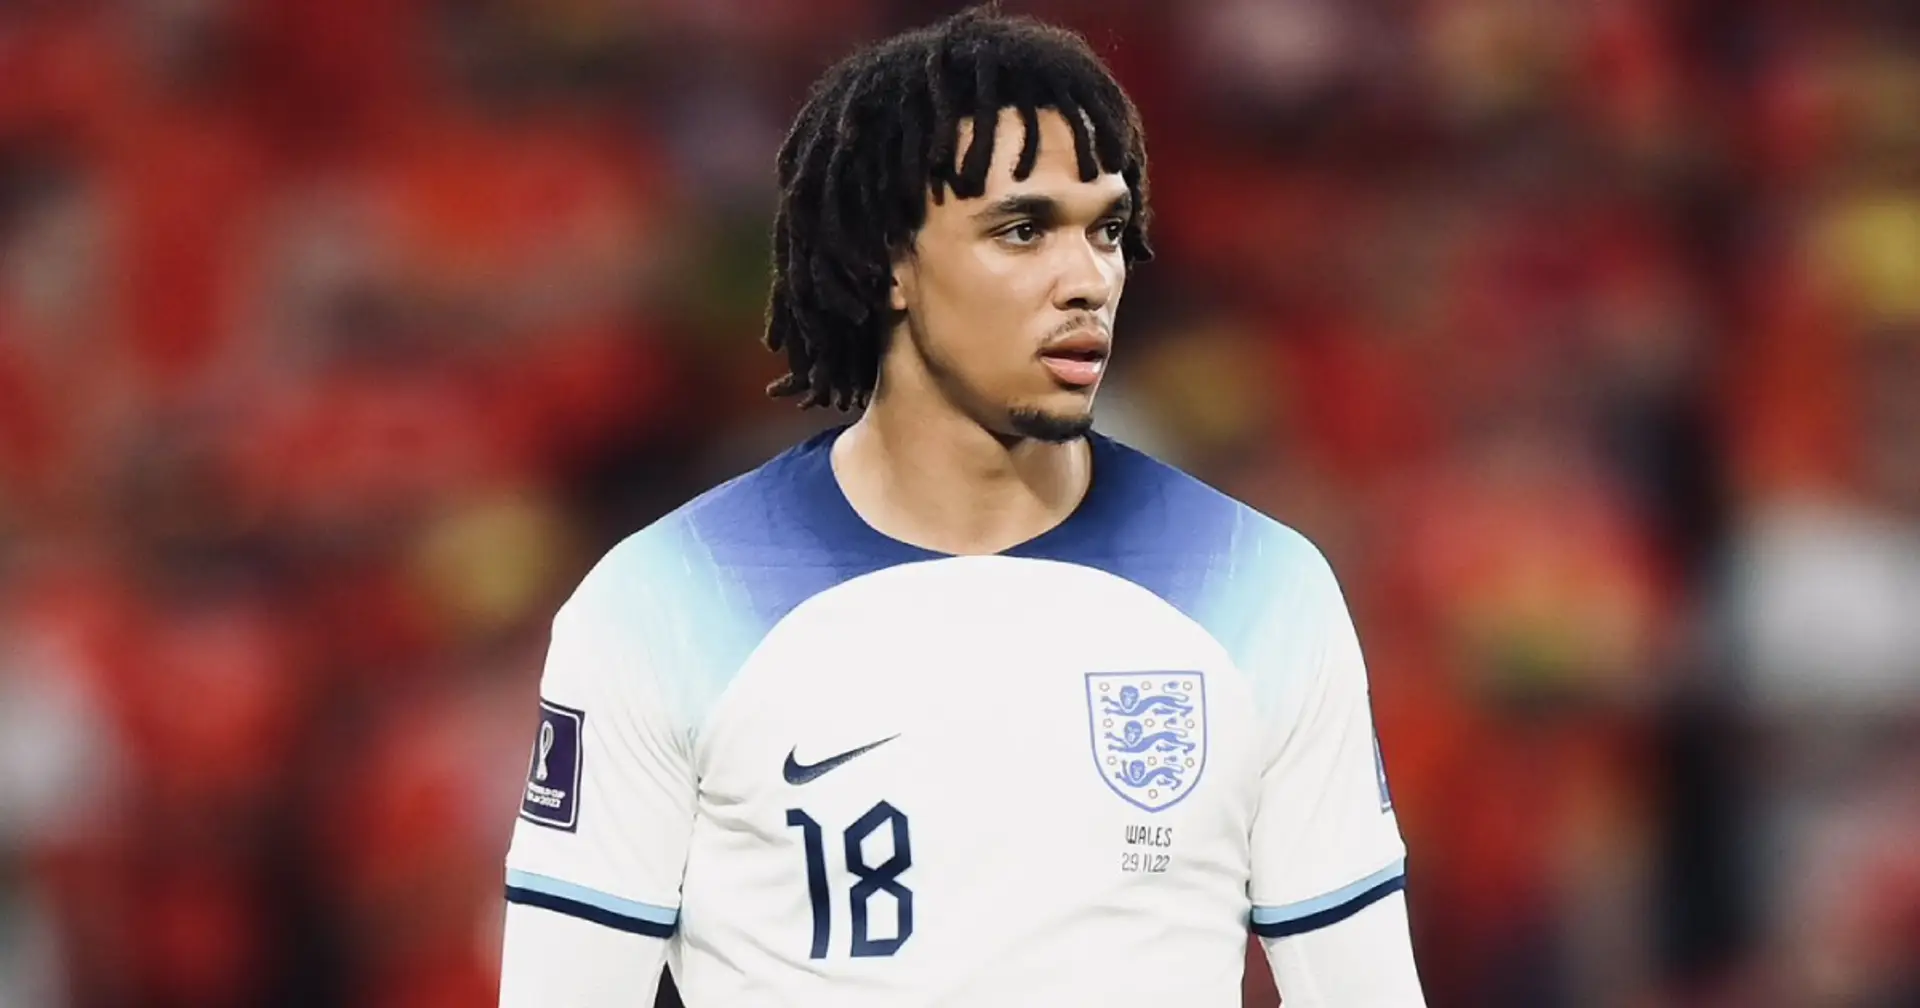 Alexander-Arnold makes his first World Cup appearance as England secure place in last 16